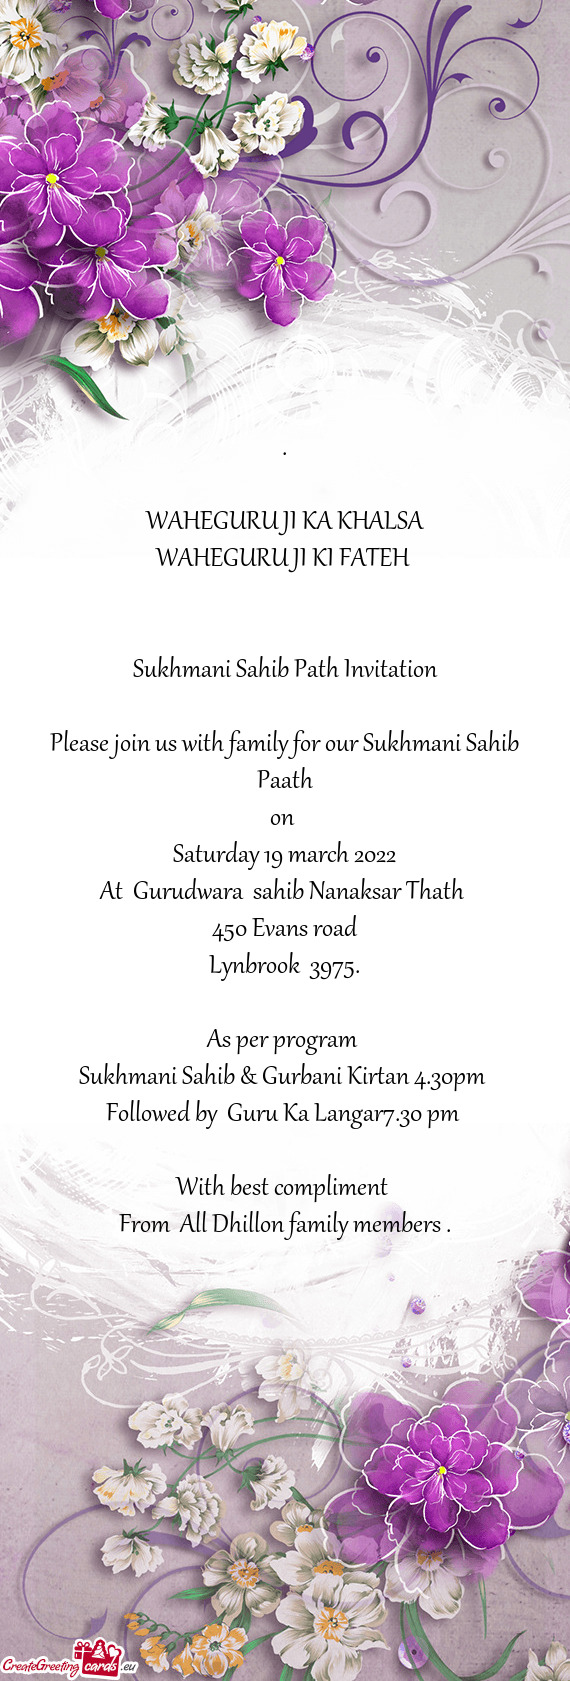 Please join us with family for our Sukhmani Sahib Paath